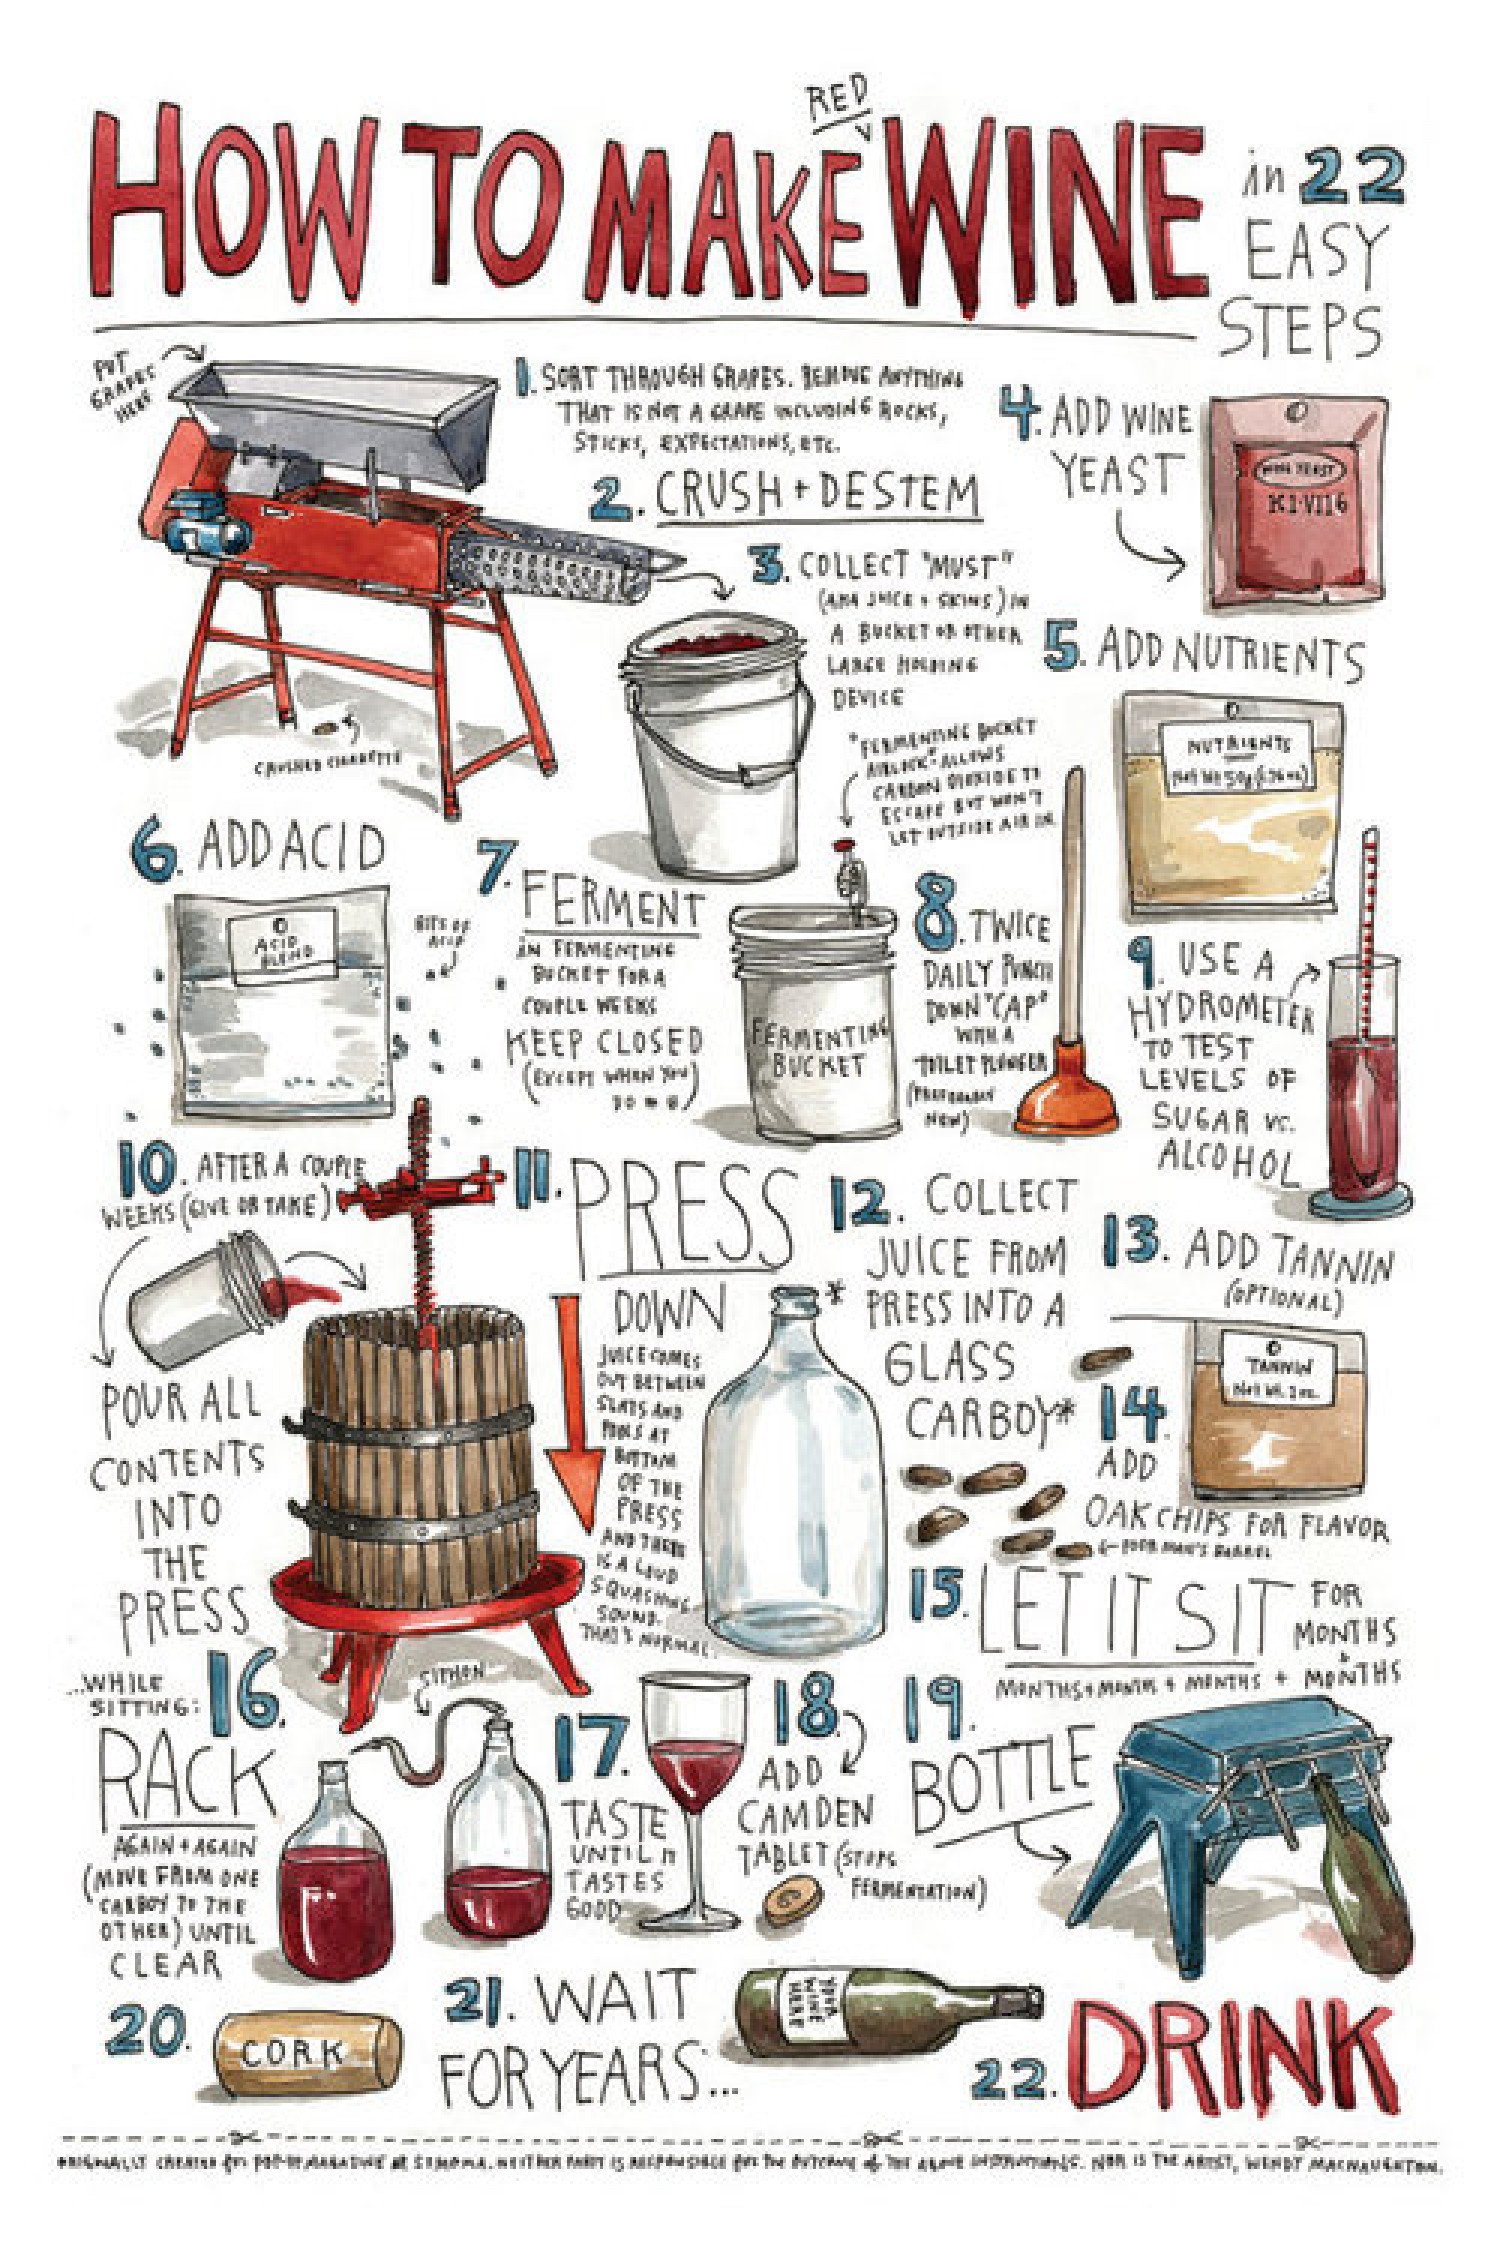 How to Make Wine in 22 easy steps